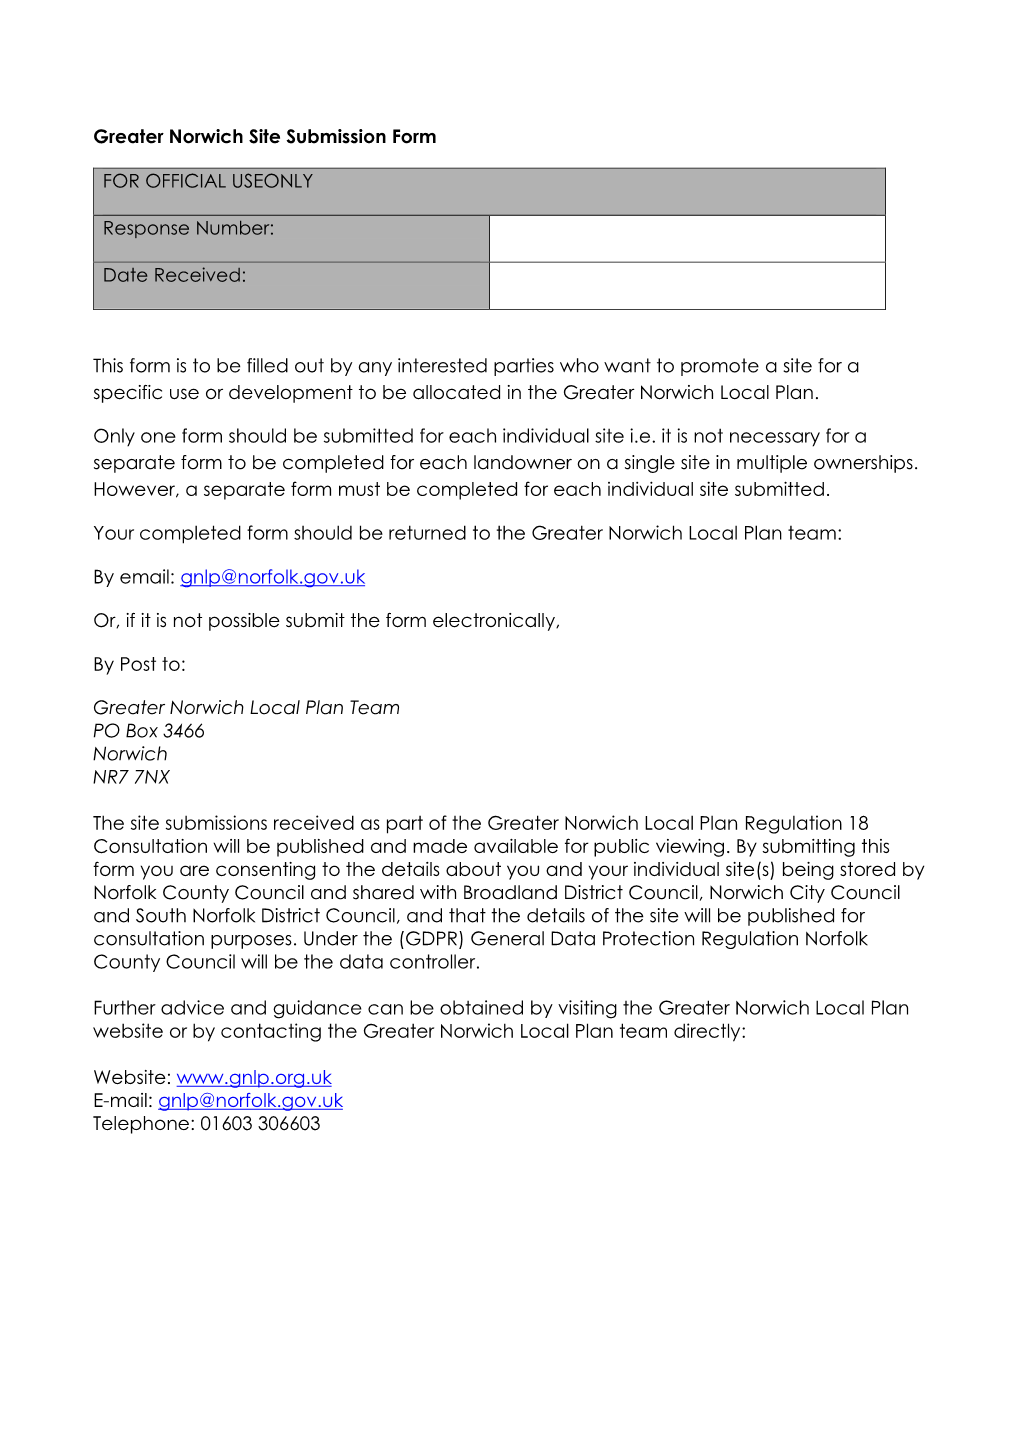 Greater Norwich Site Submission Form for OFFICIAL